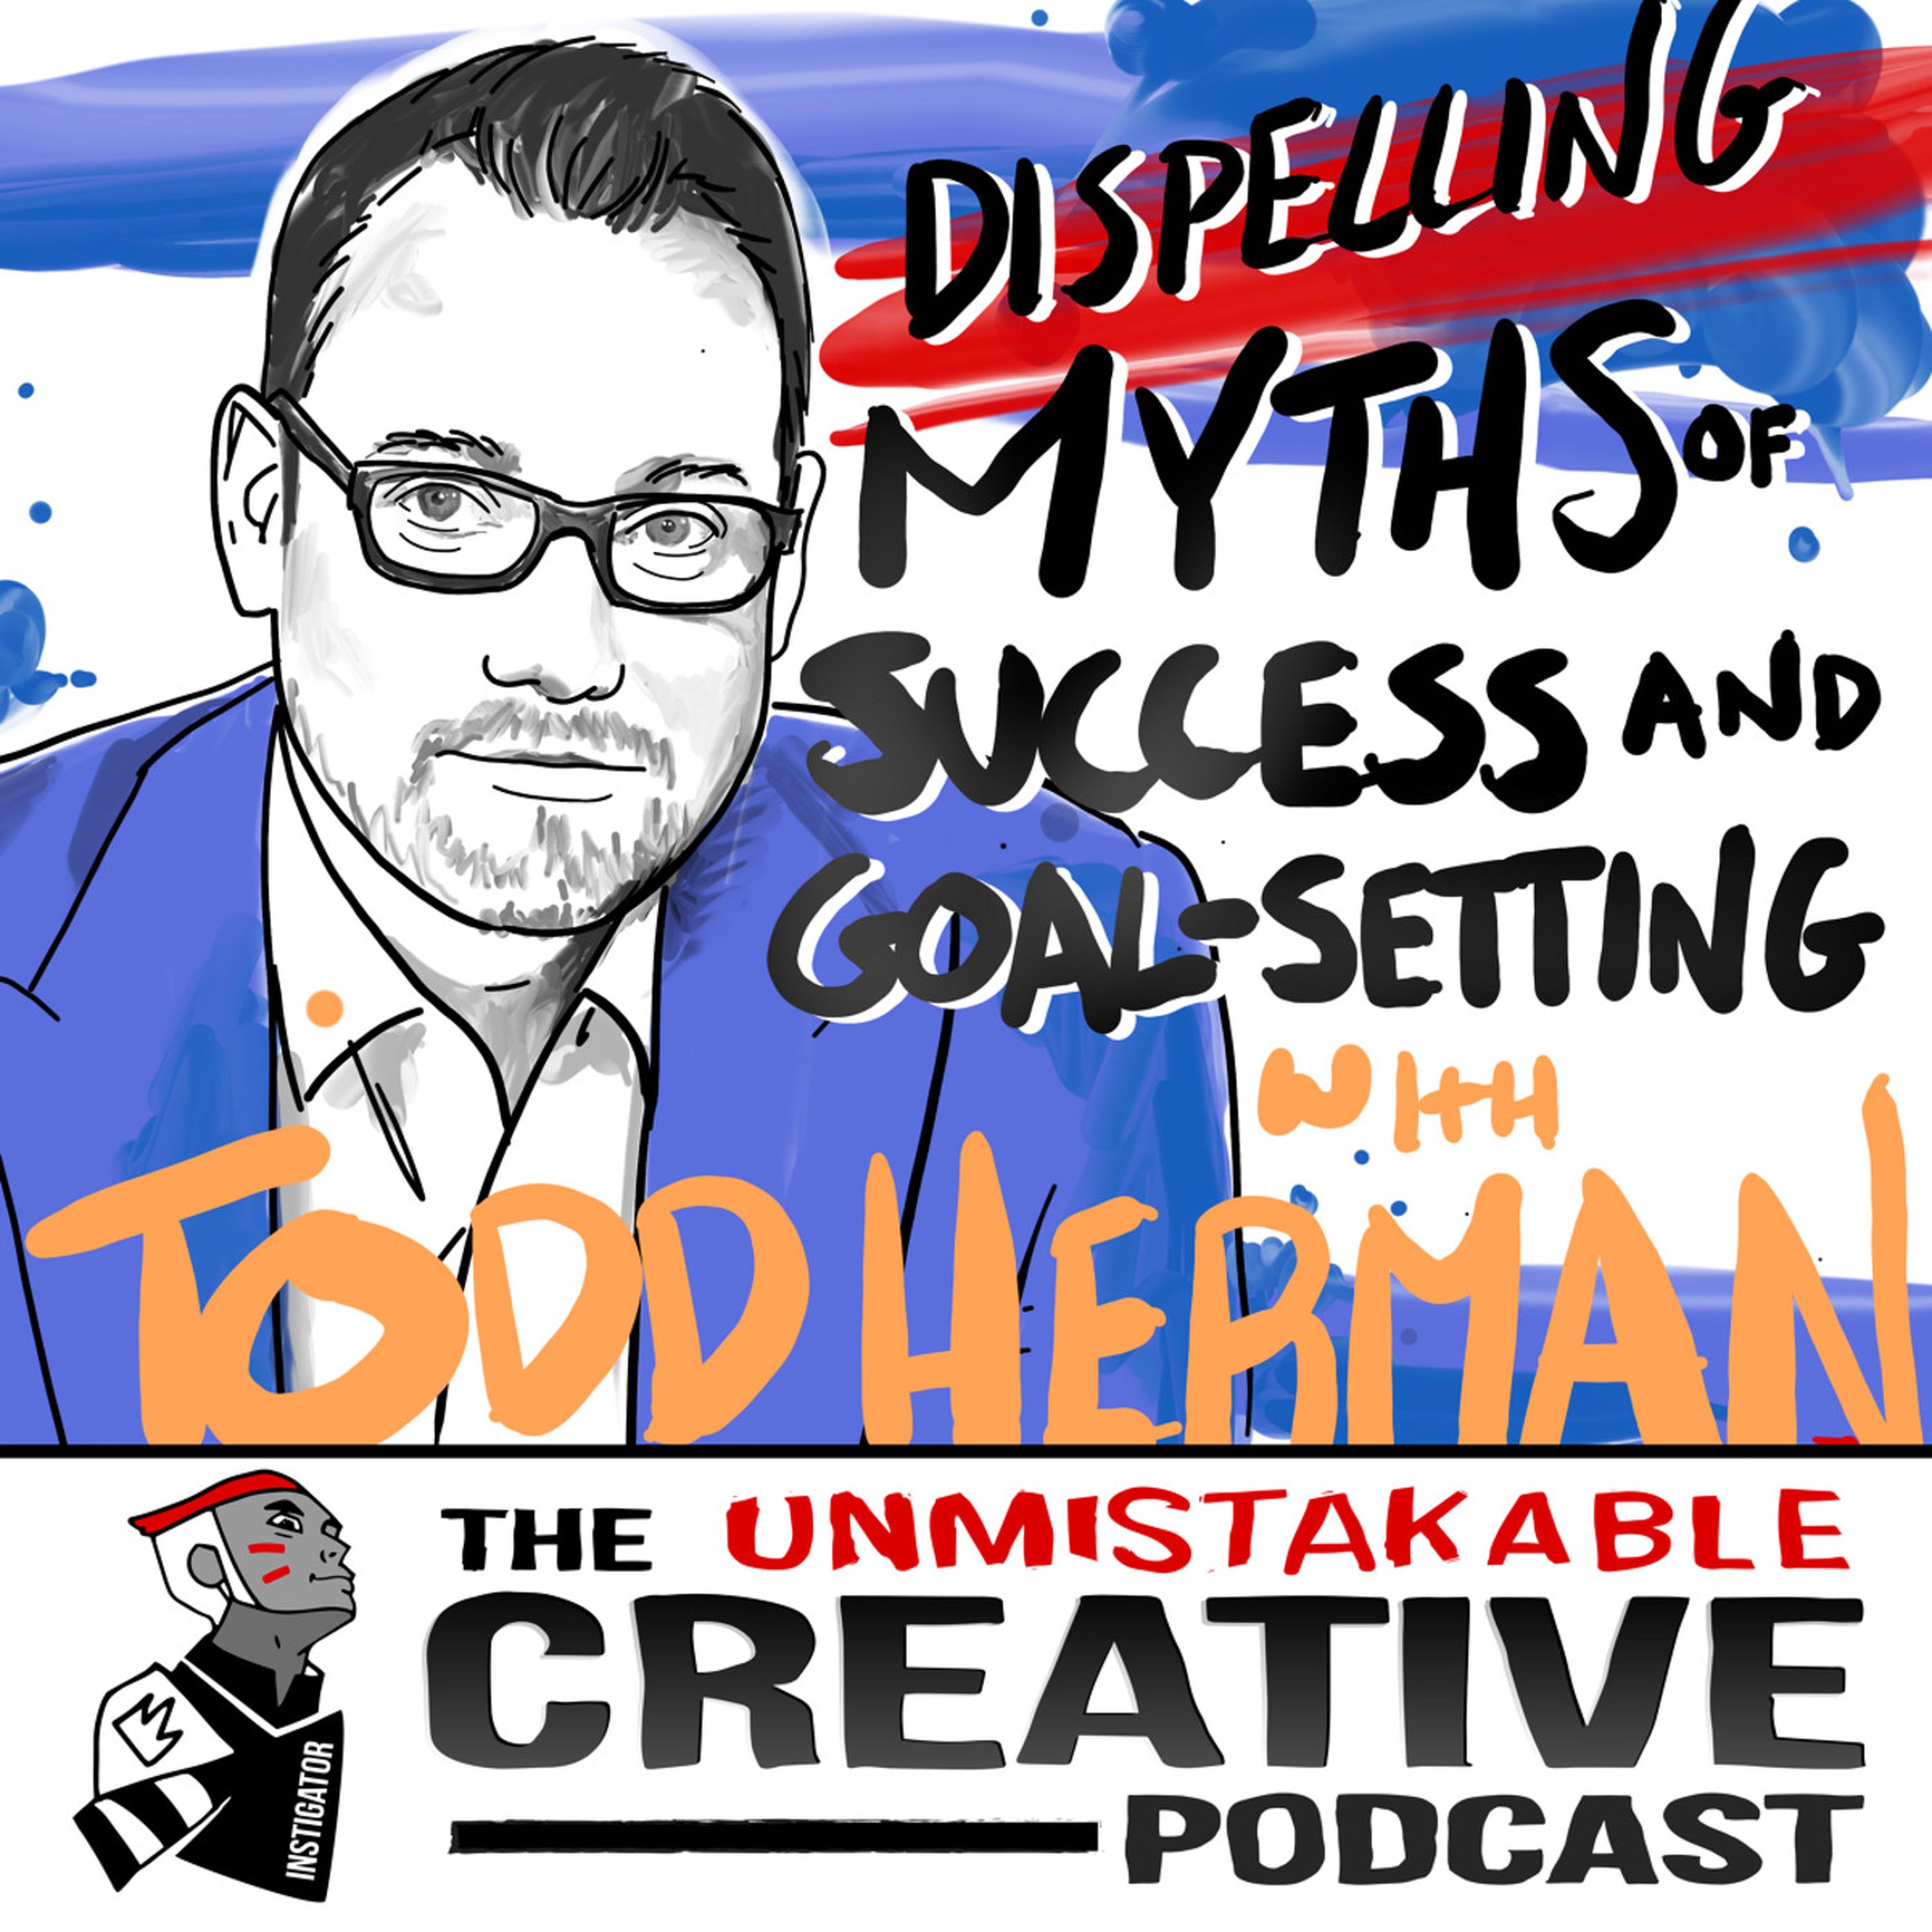 Best of: Dispelling Myths of Success and Goal Setting With Todd Herman